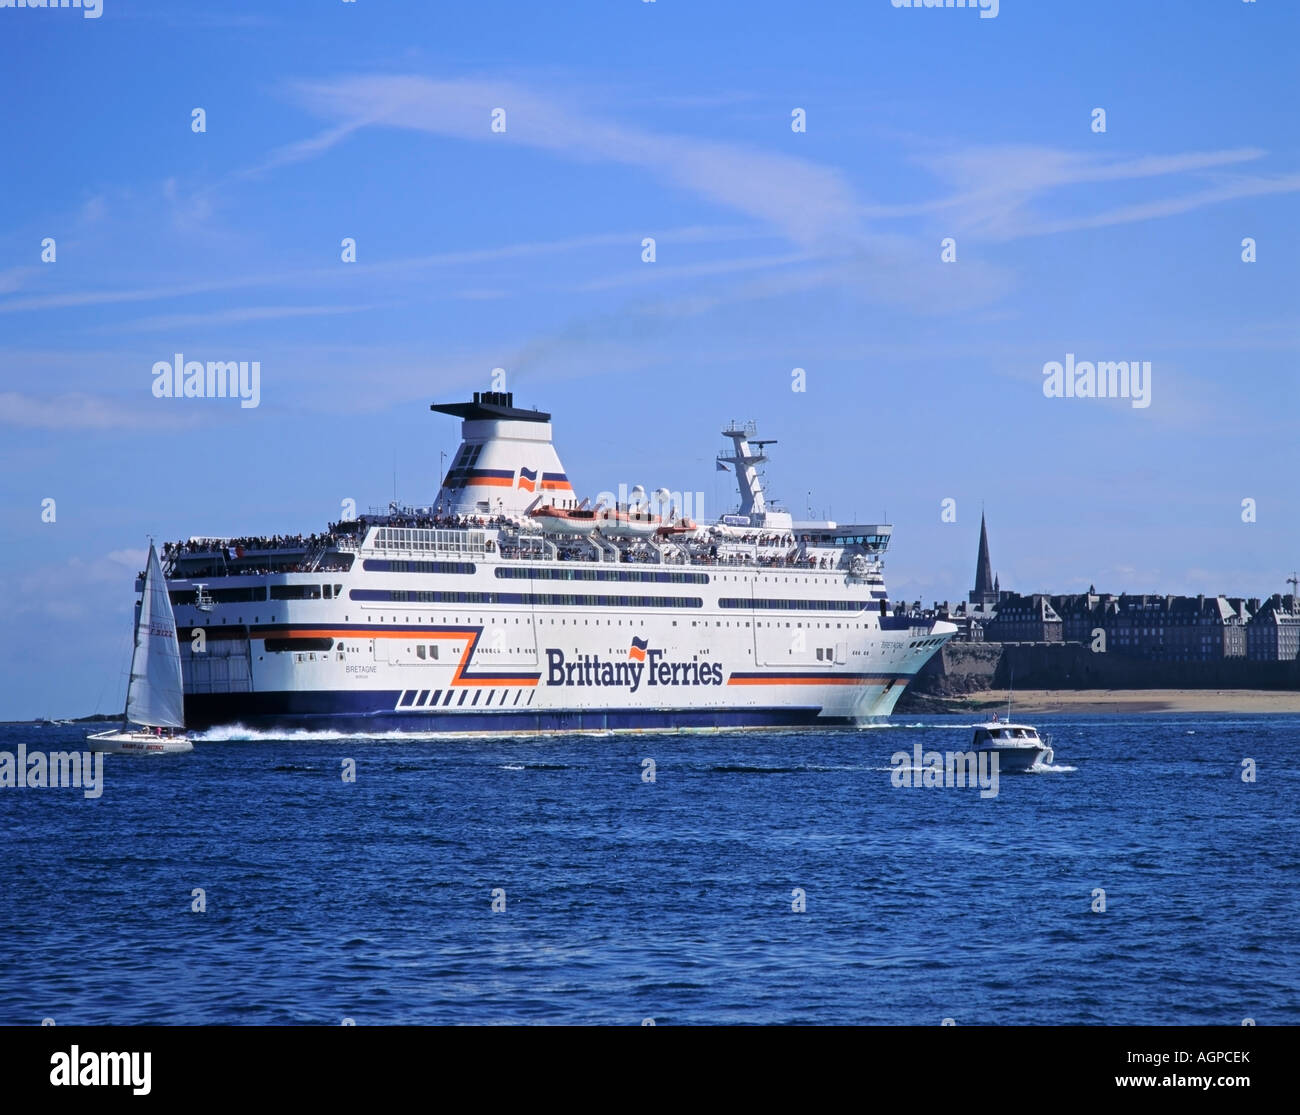 Saint-Malo, Brittany Ferries Portsmouth-Saint-Malo ferry ''Bretagne' arriving at Saint-Malo, River Rance, Brittany, France Stock Photo